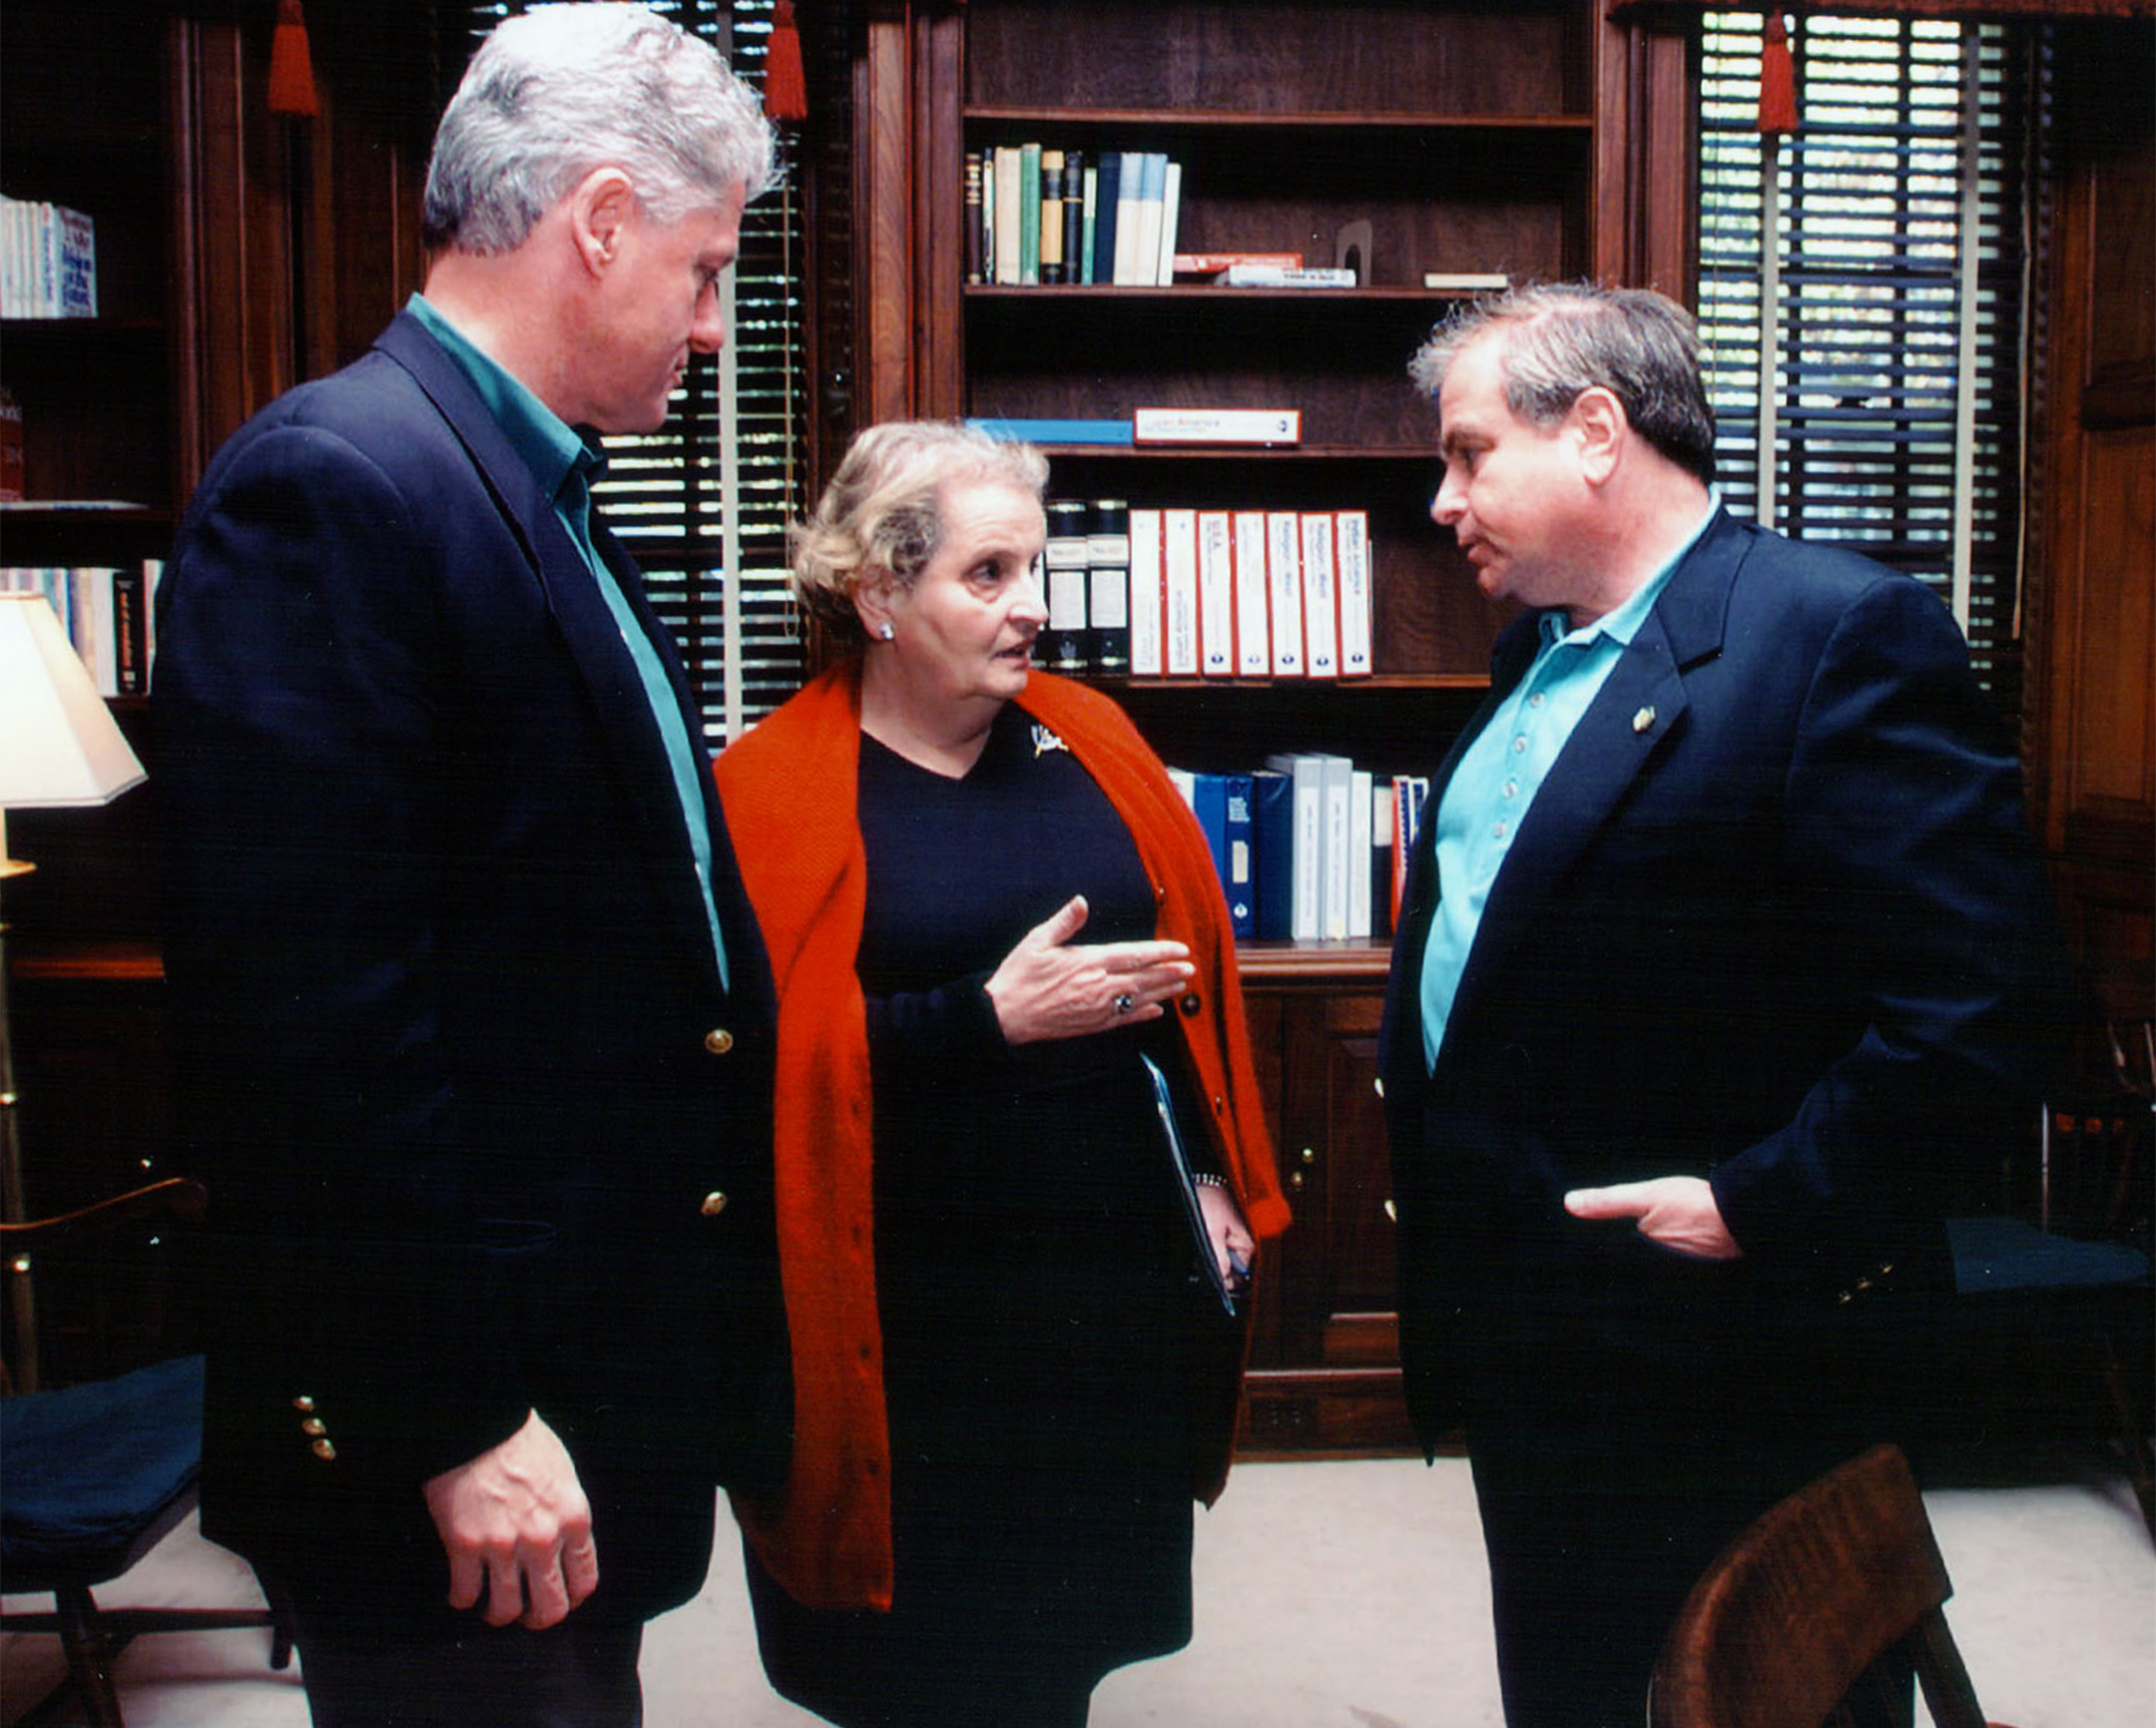 Madeleine Albright, center, speaking to two men in a wood-paneled library